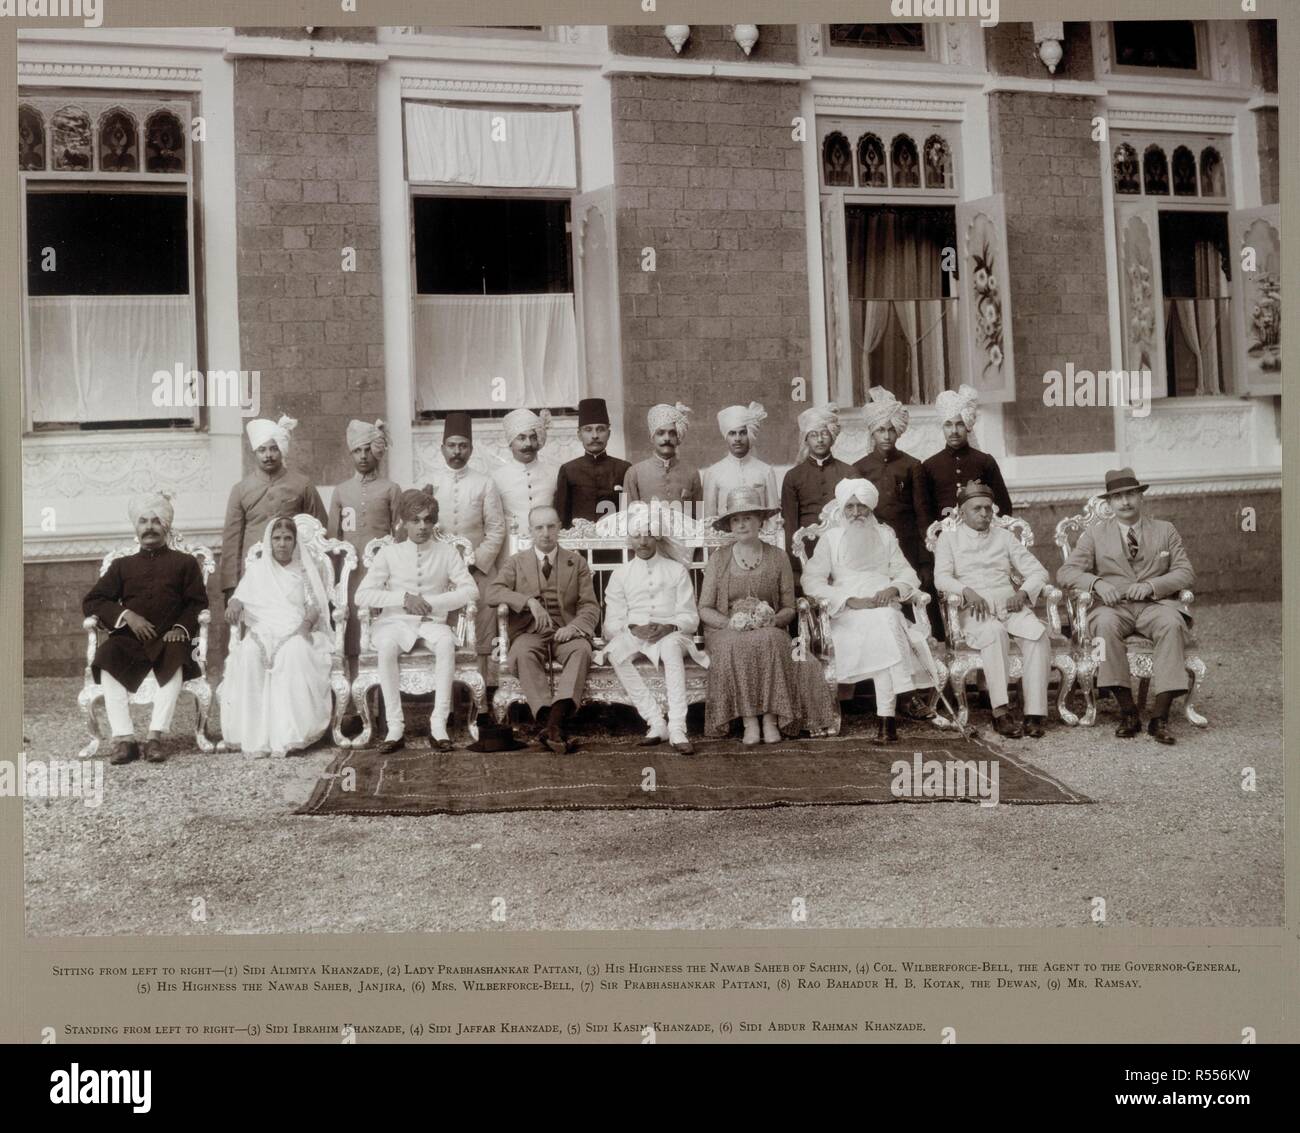 A formal group portrait of the Nawab of Janjira, Court officials and British guests, at the Palace, Murud. Wilberforce-Bell Collection: 'His Highness Nawab Sahib Sidi Muhammad Khan, Janjira, Investiture and Marriage, 1933 A.D.'. 9 Nov. 1933. Photograph. Source: Photo 1/1(32). Language: English. Stock Photo